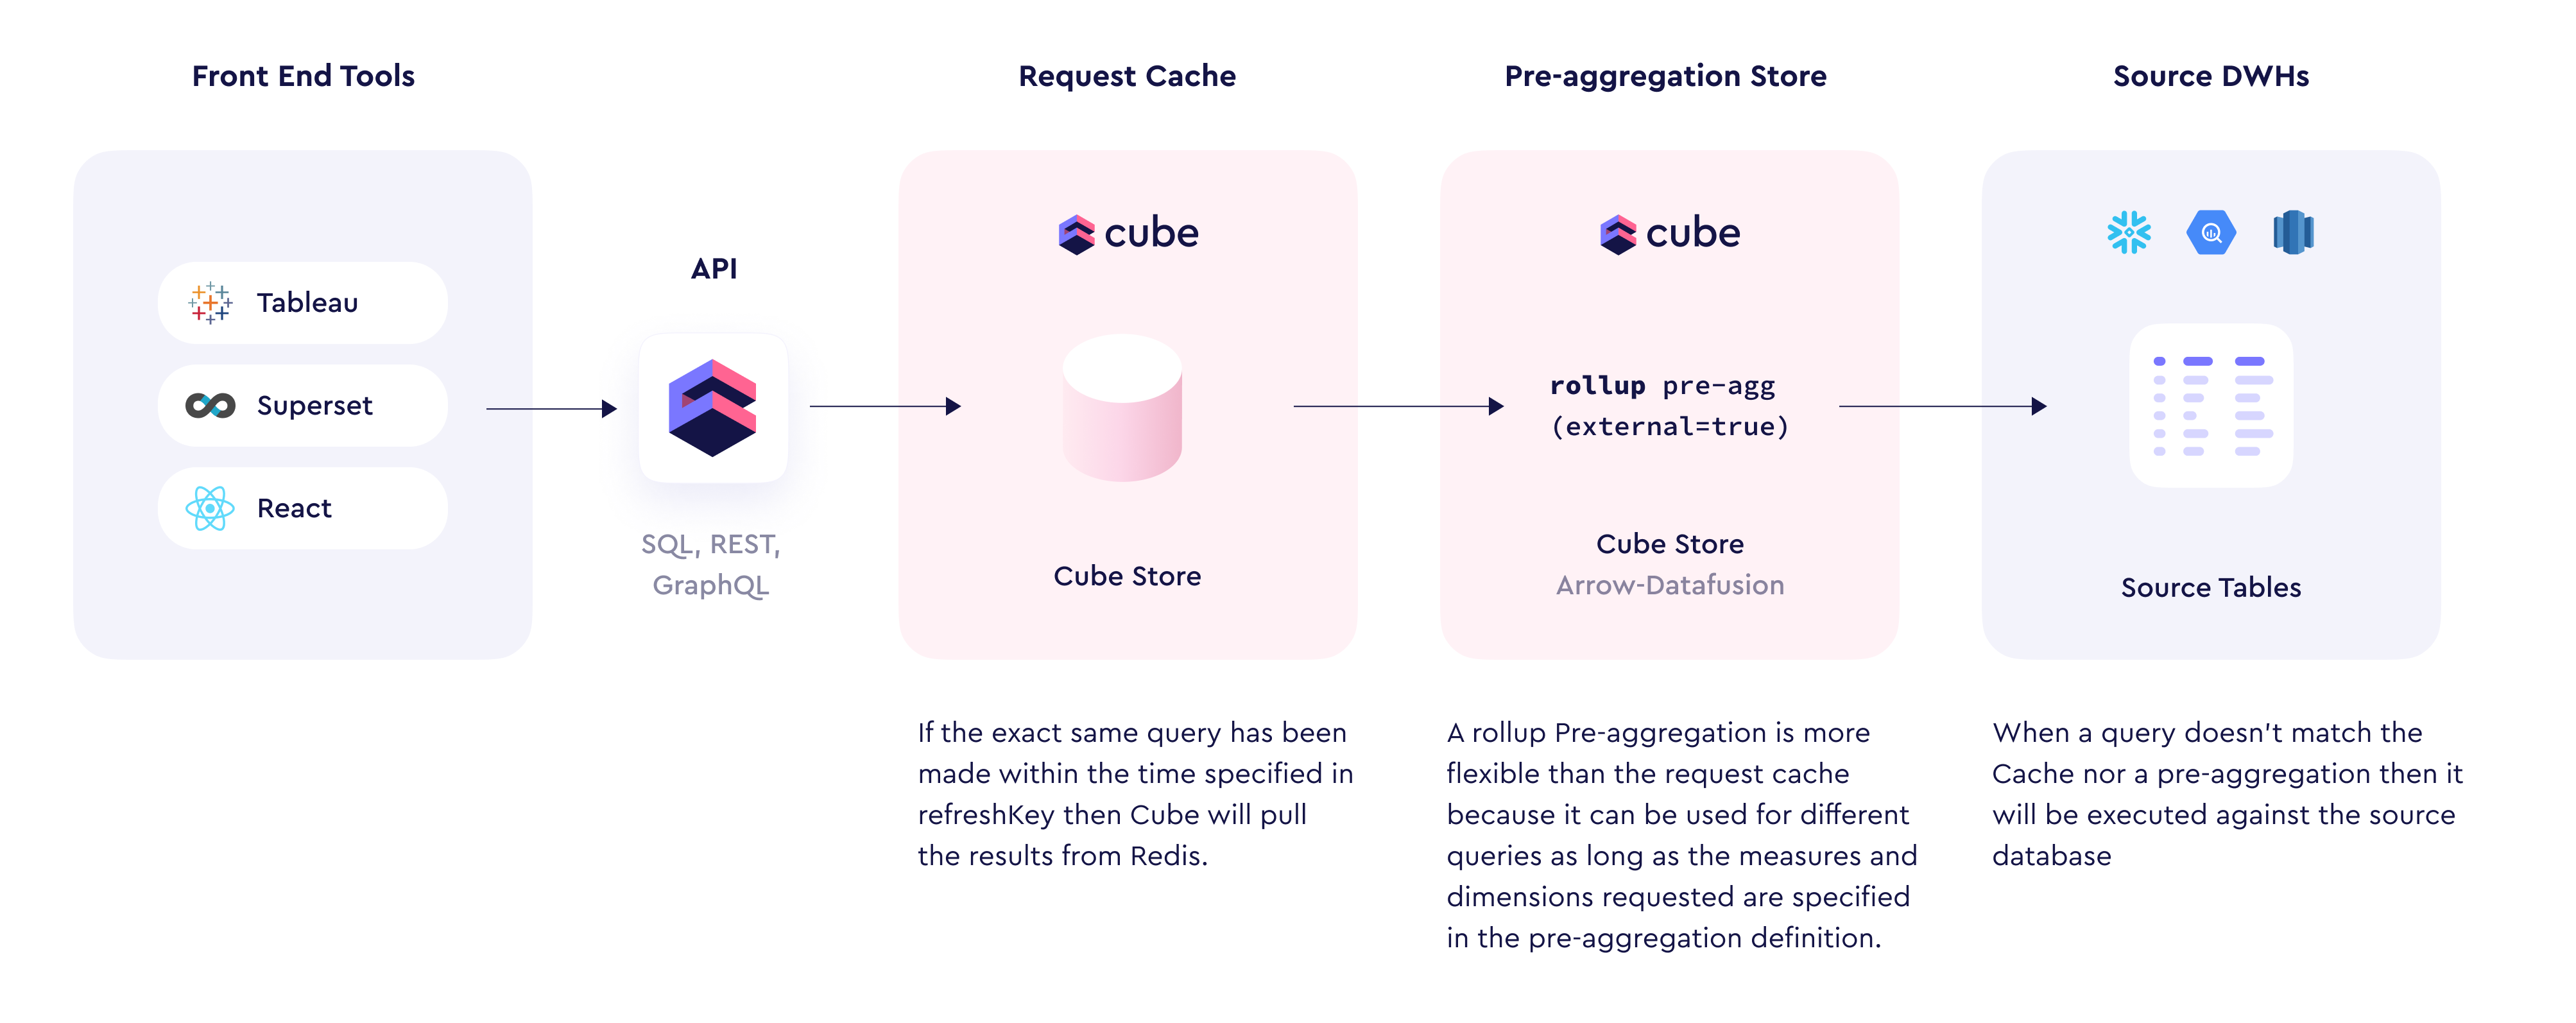 Request vs Cube caching layers